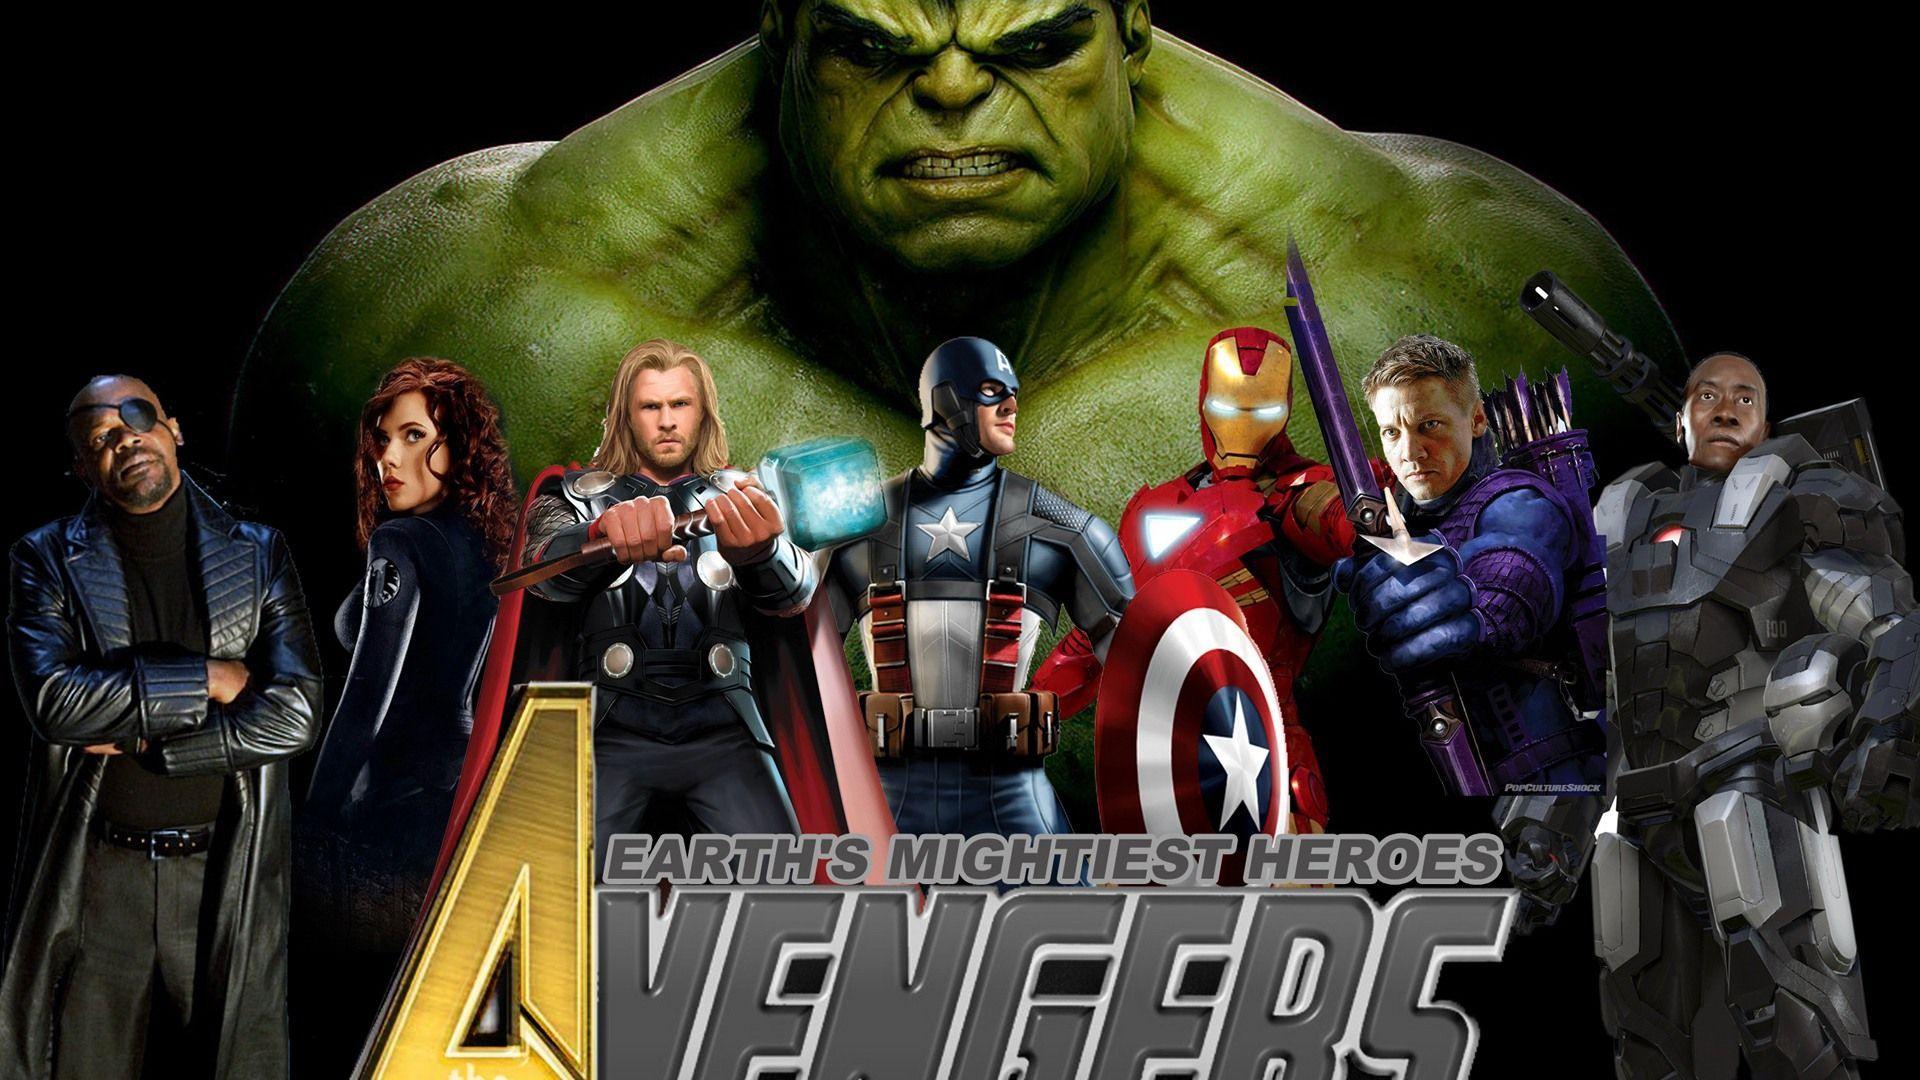 The Avengers Wallpaper Collection For Free Download. HD Wallpaper